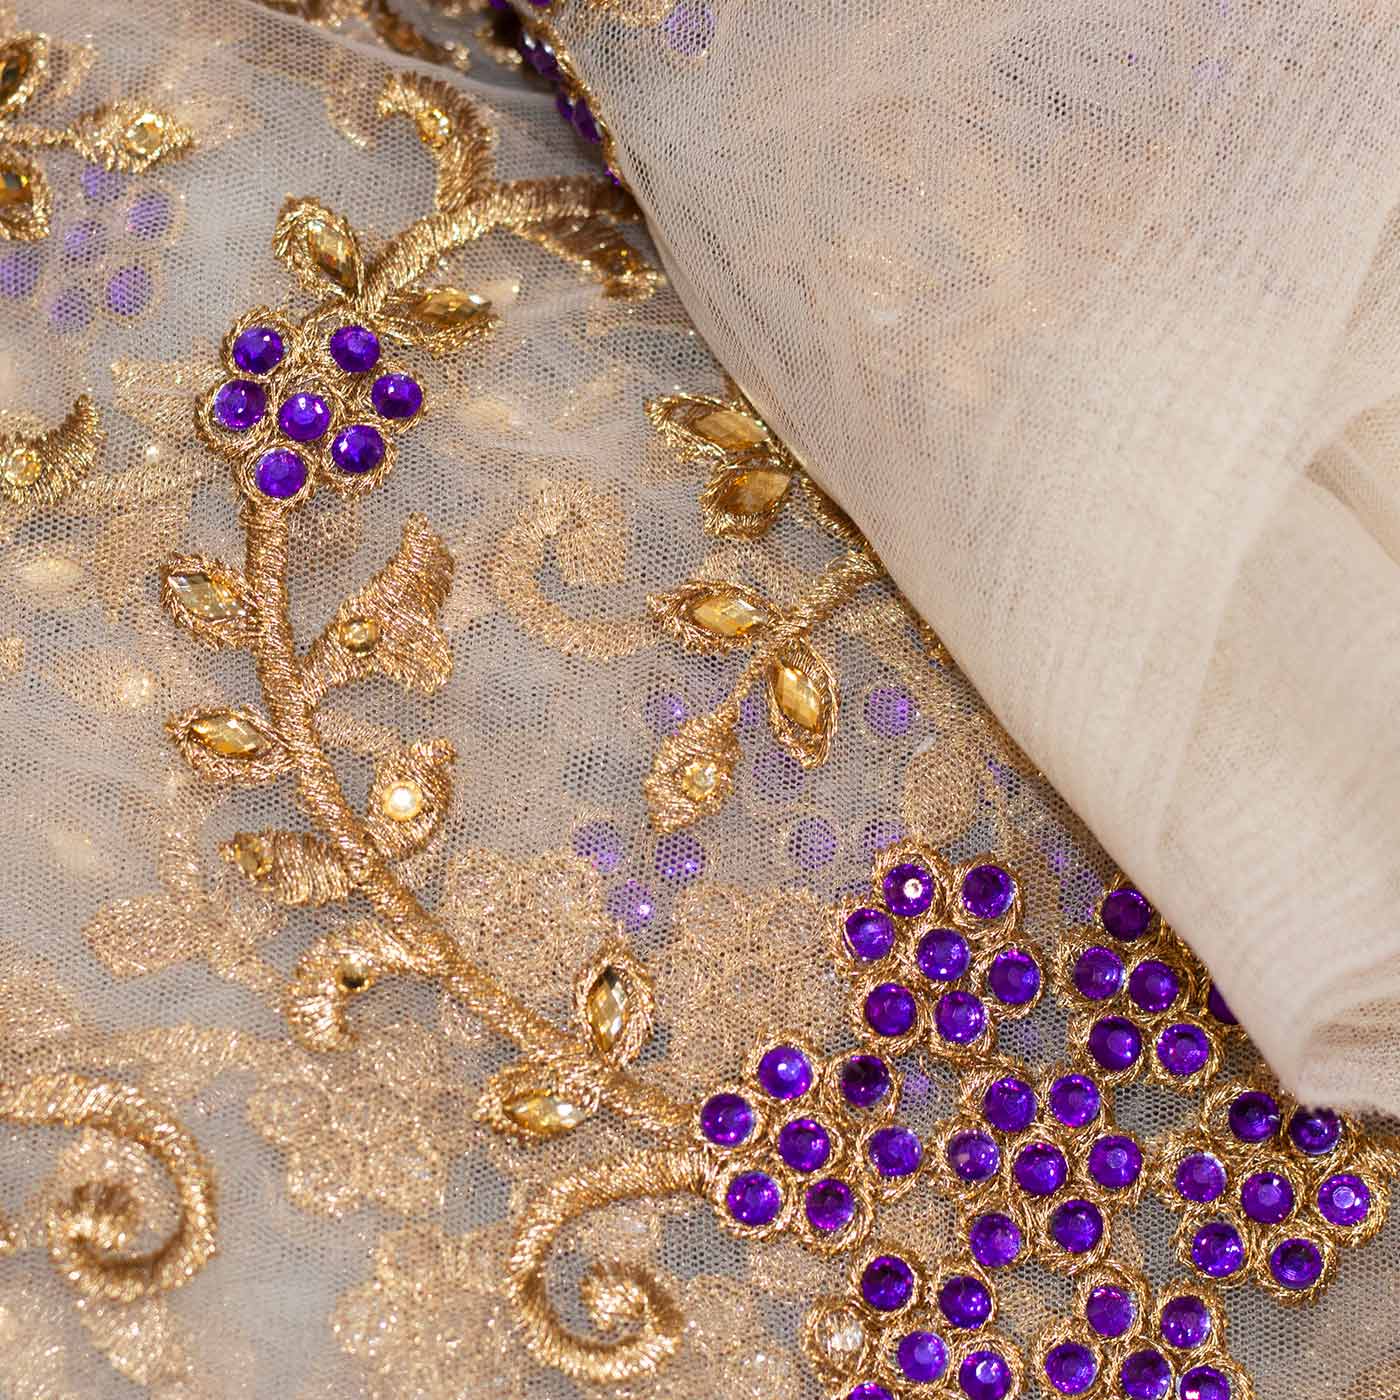 Embroidered Gold Mesh Fabric